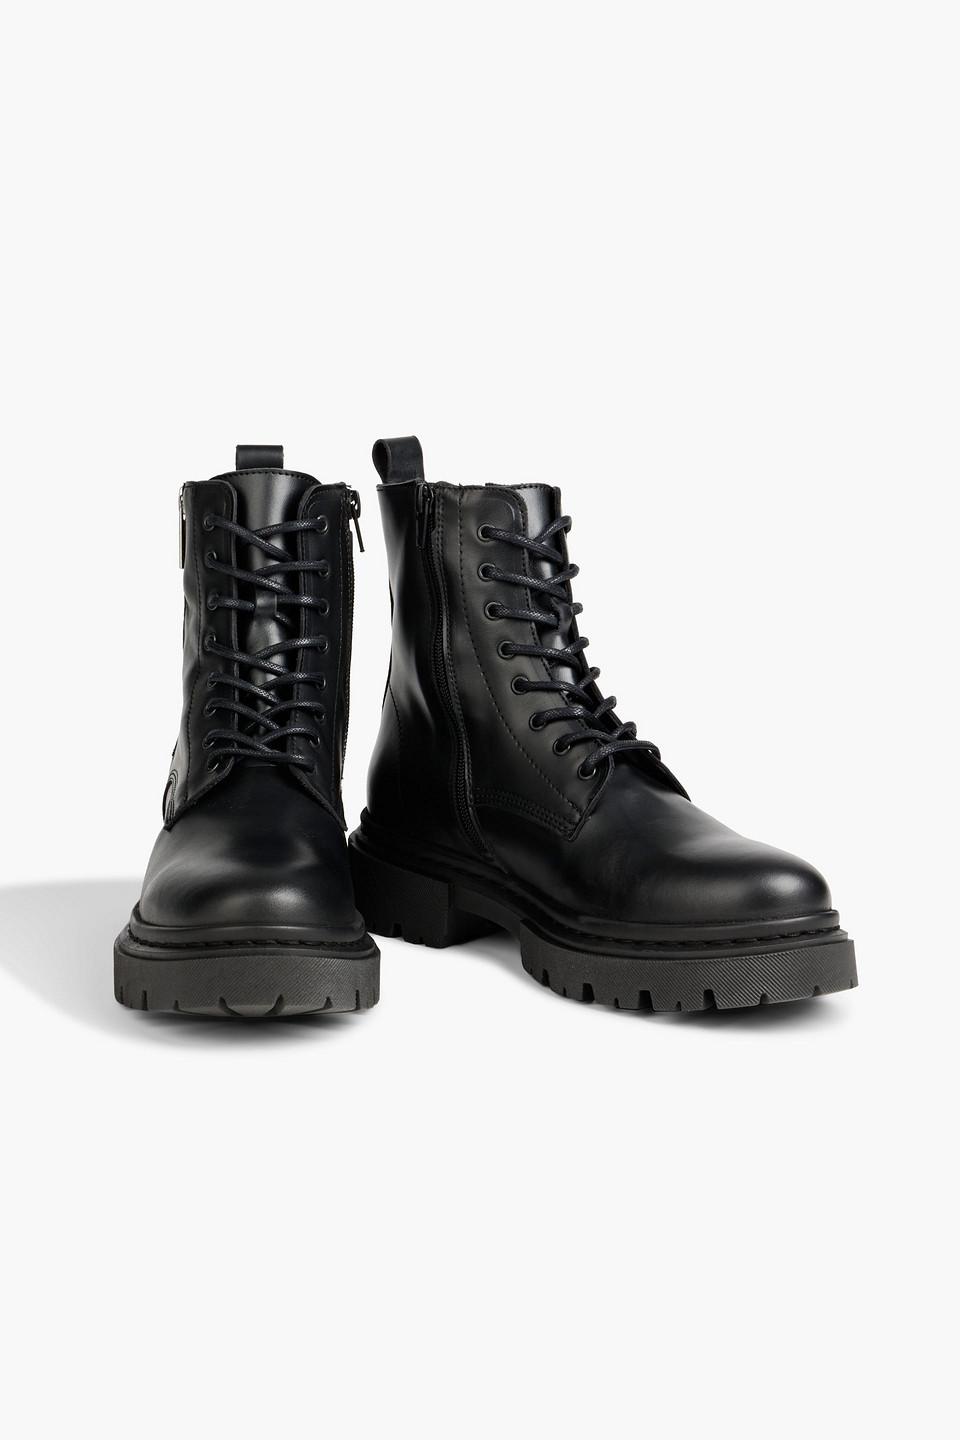 Iris & Ink Clementine Leather Combat Boots in Black | Lyst